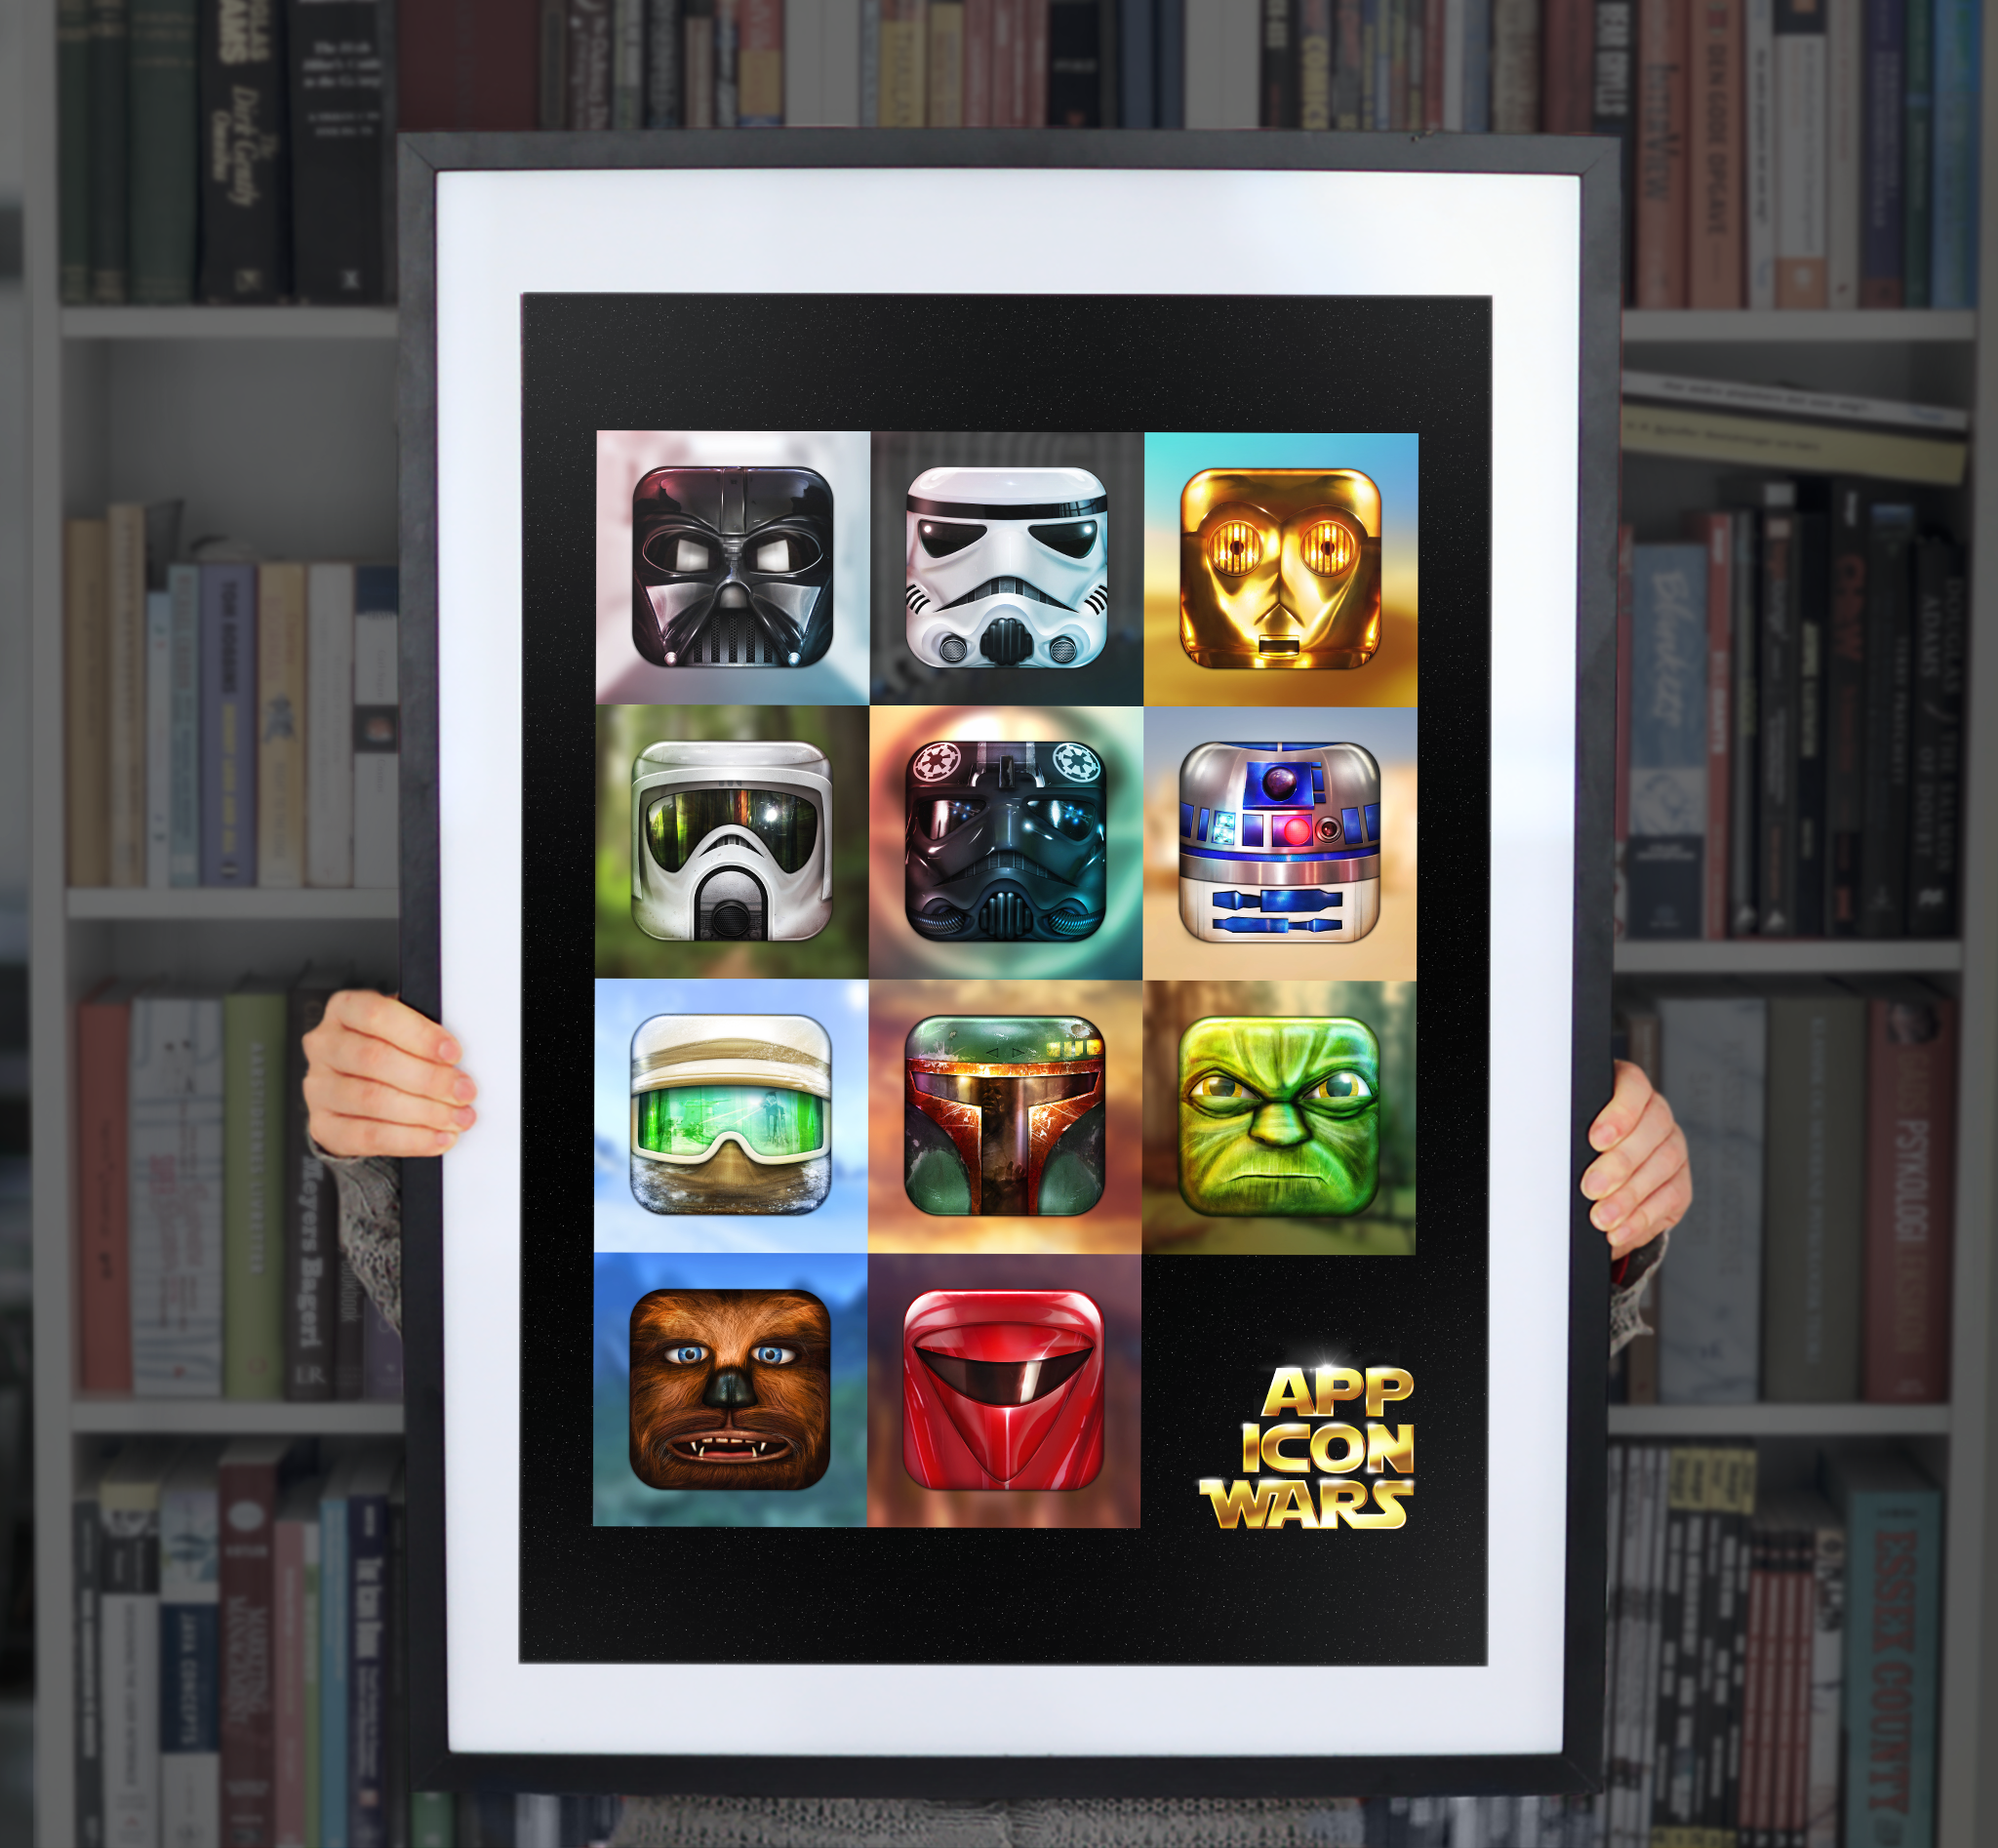 Starwars-App-Icons-Collected-works-large-1